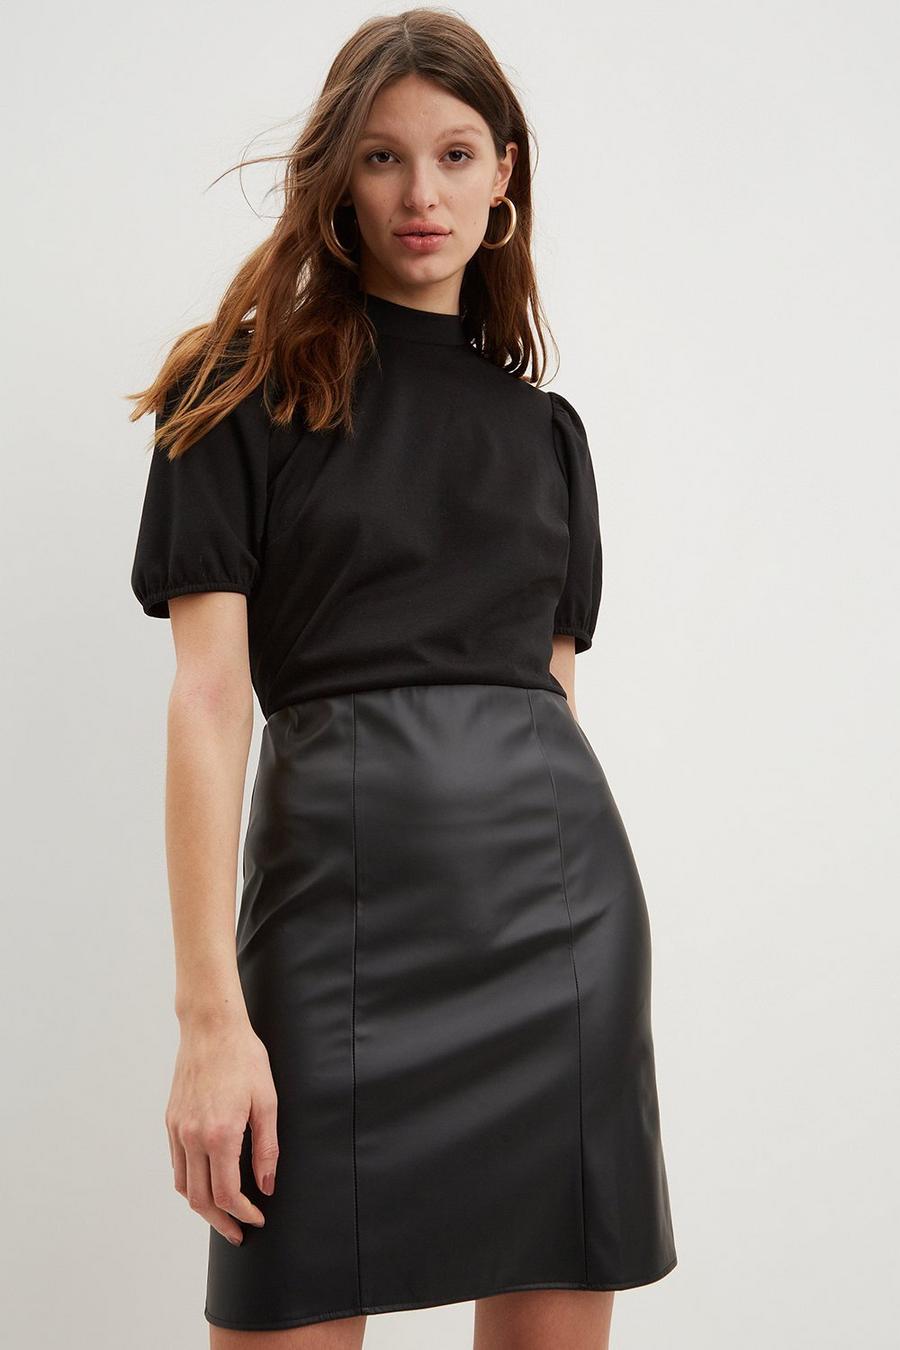 2-in-1 faux leather dress